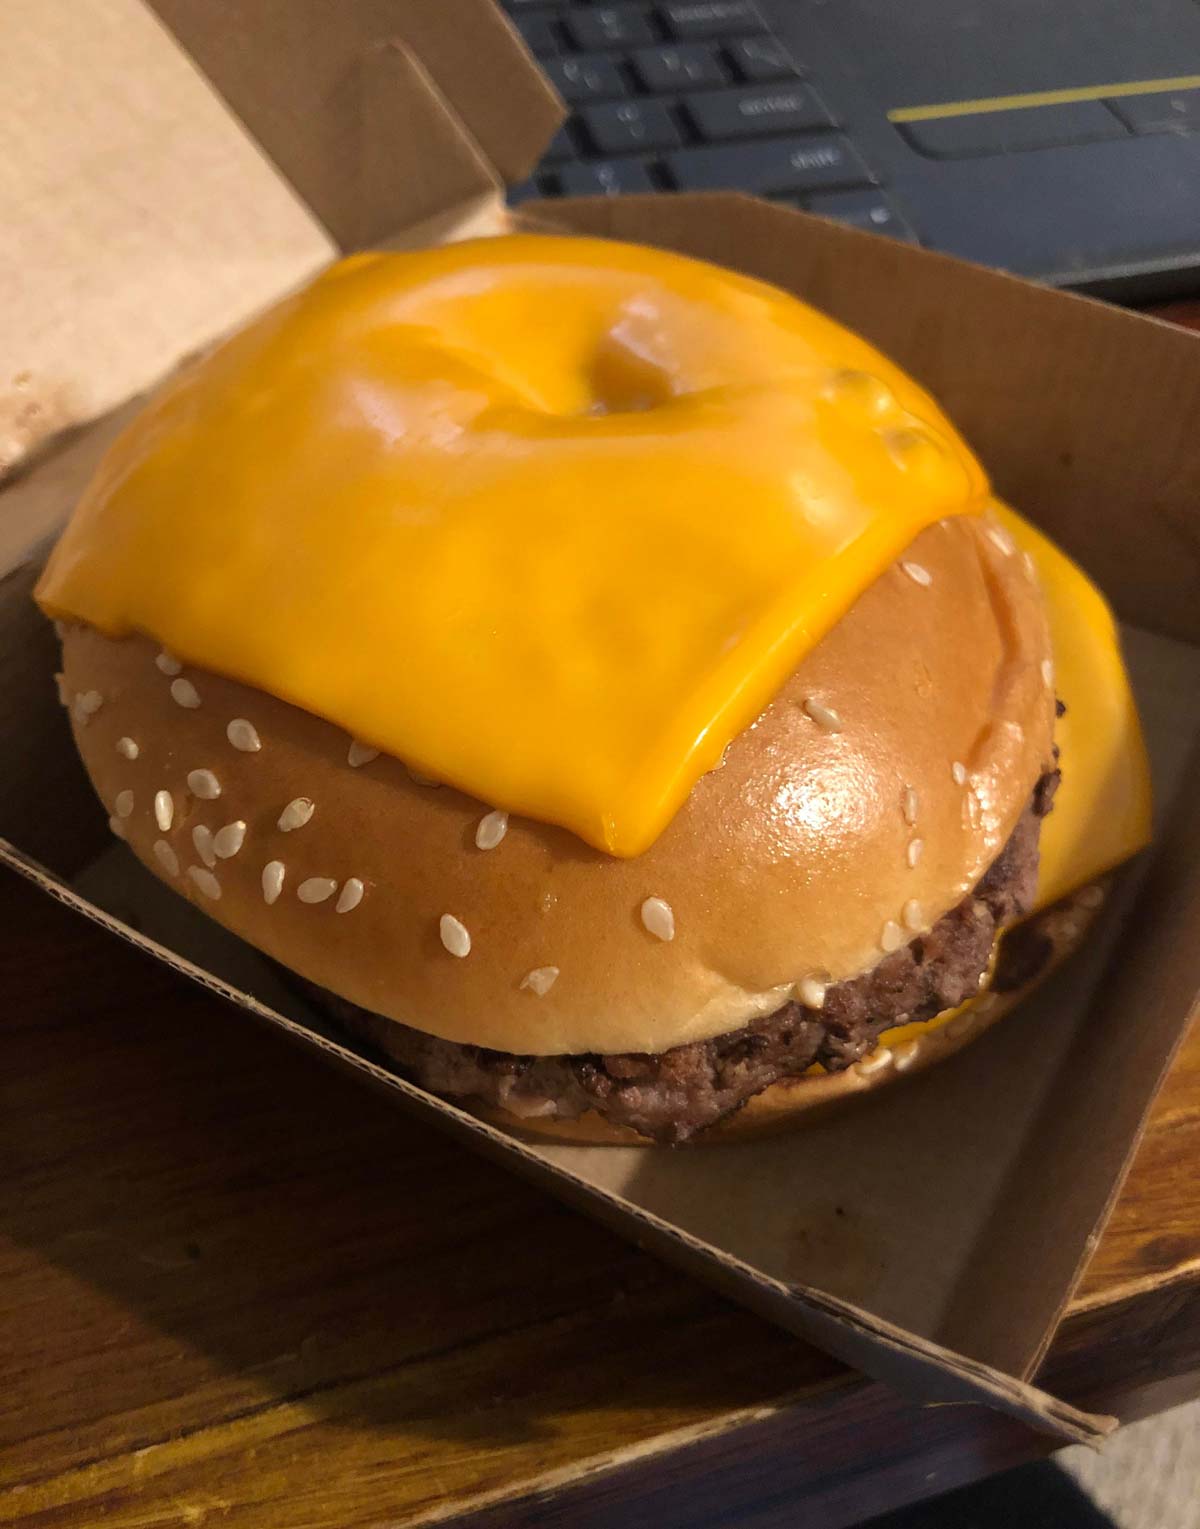 Asked for extra cheese on the burger. Clearly someone’s first day